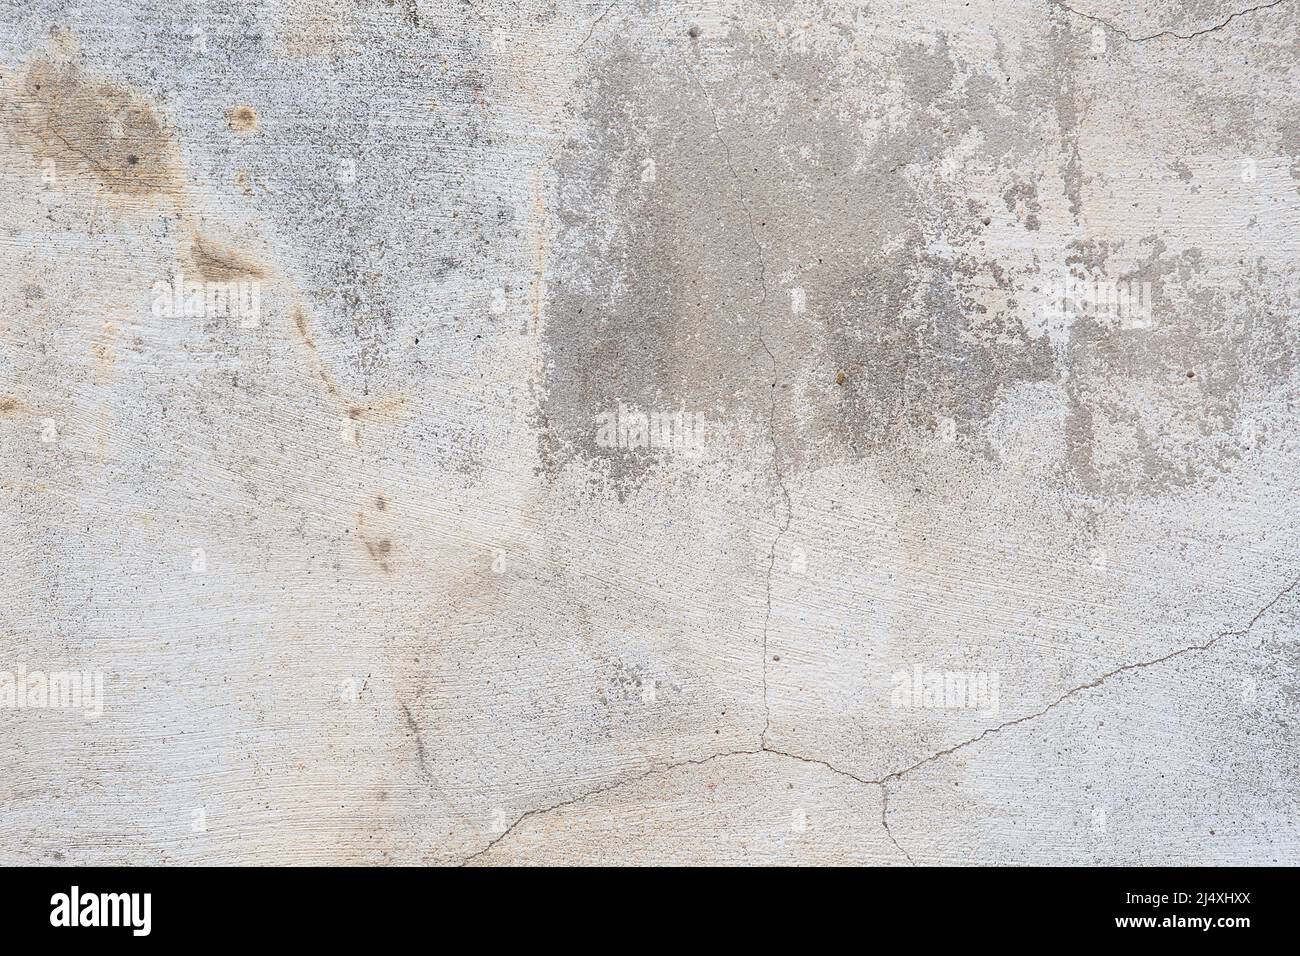 Old flaky wall with destroyed plaster. Renovation of old house. Industrial style design wall background. Grunge cracked concrete wall with old paint. Stock Photo